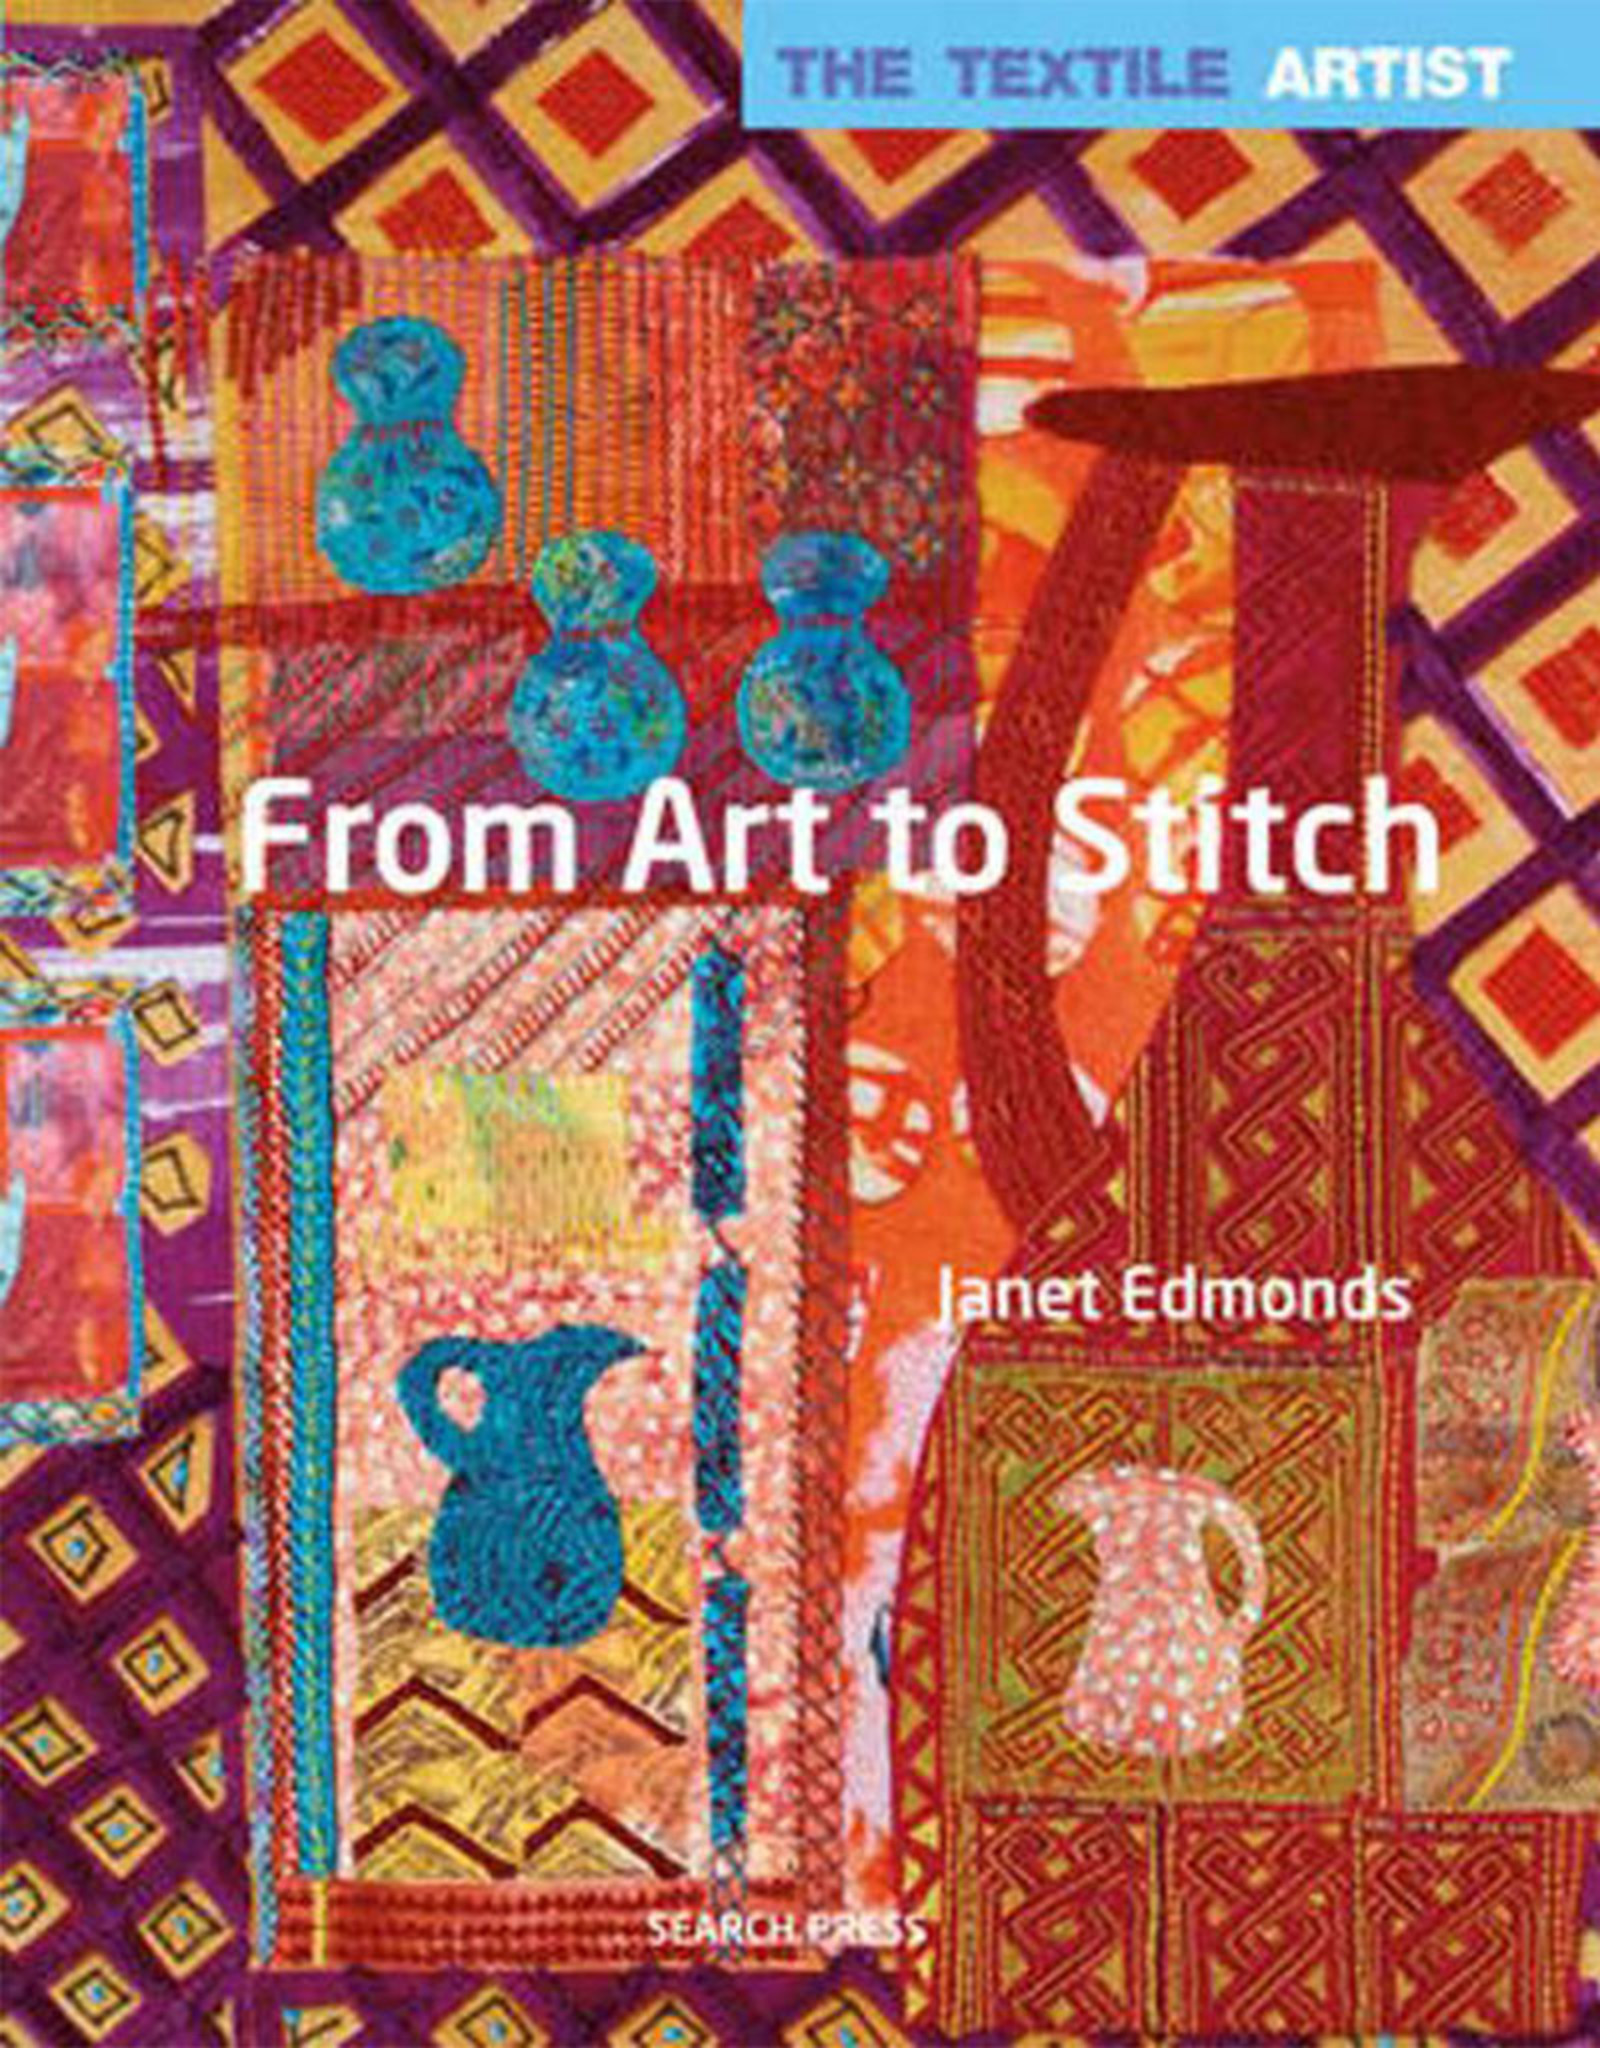 From Art to Stitch by Janet Edmonds